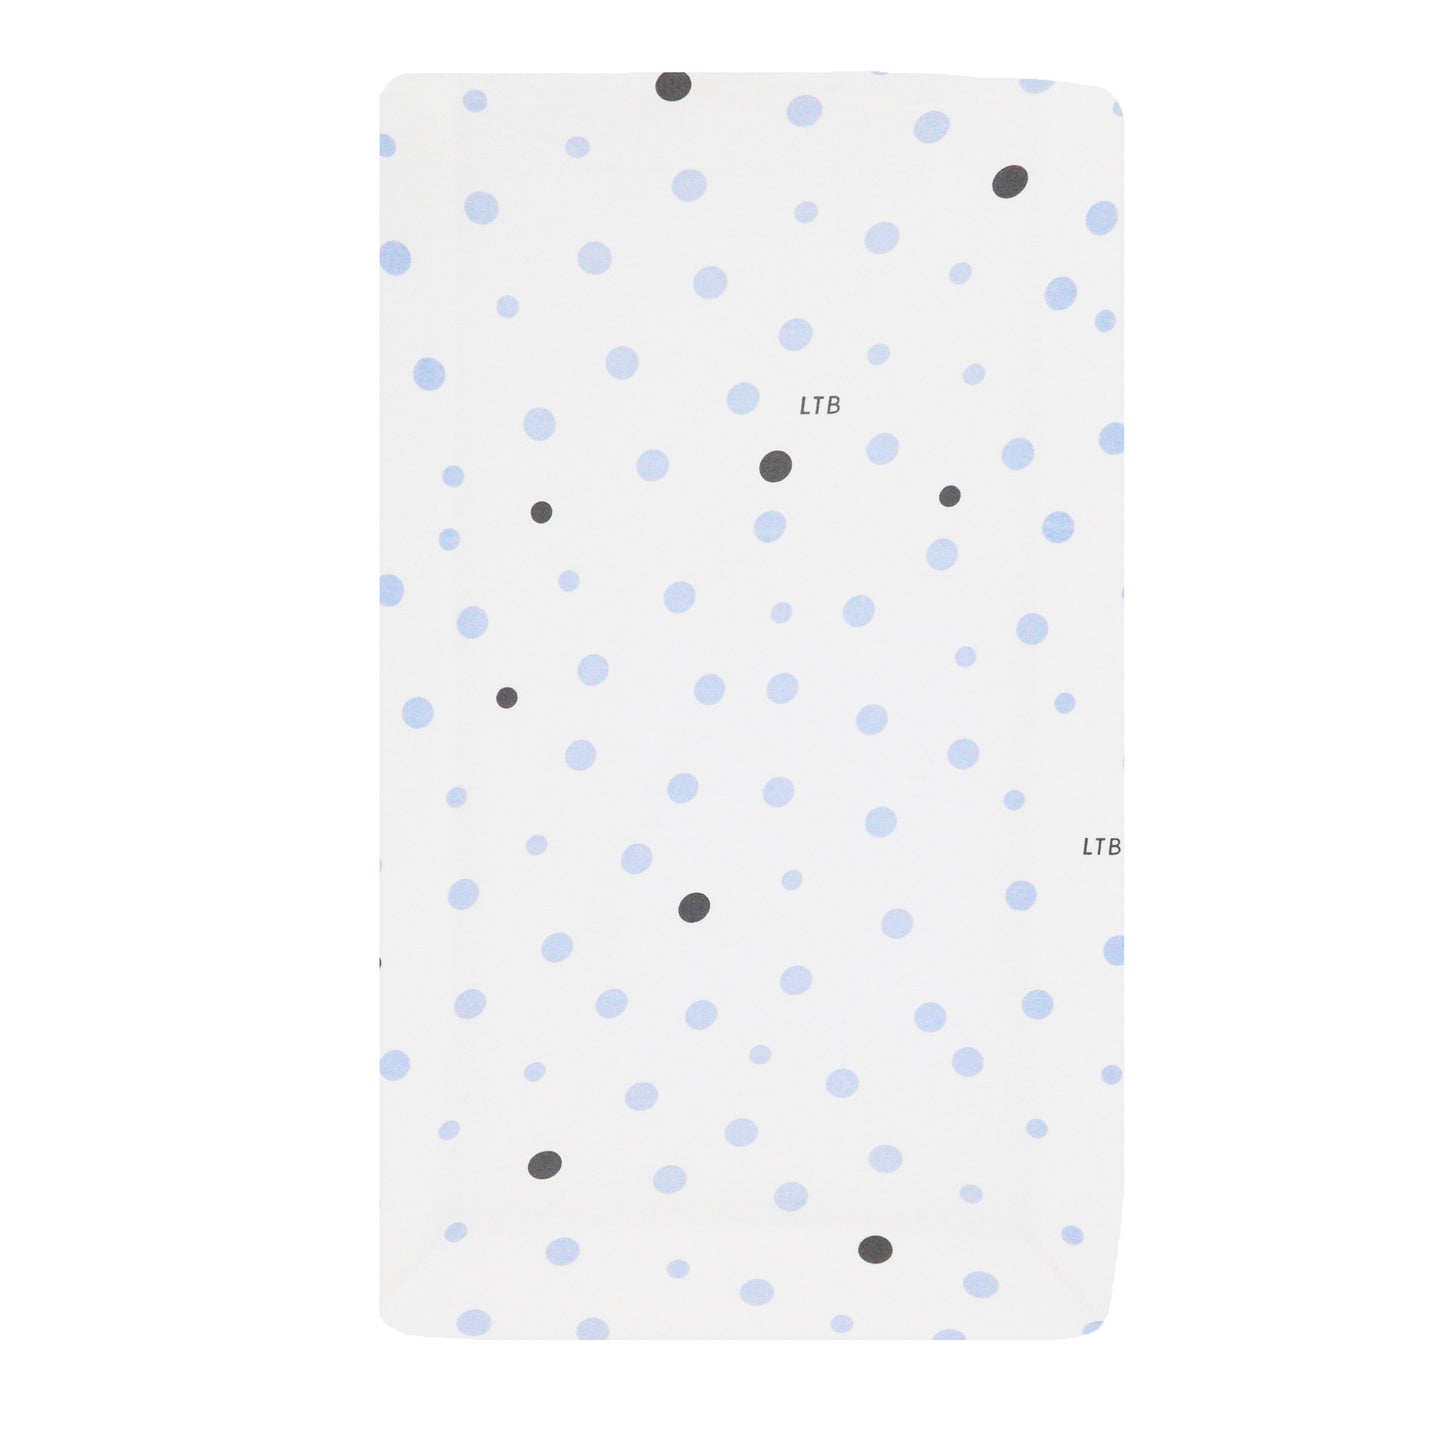 Little Turtle Baby Change Mat Covers add that finishing touch to your baby's nursery.  This size of fitted sheet - 80x50x12cm - is not only perfect for covering your changing pad, but also fits many of the smaller sized bassinets, 100% Jersey Cotton